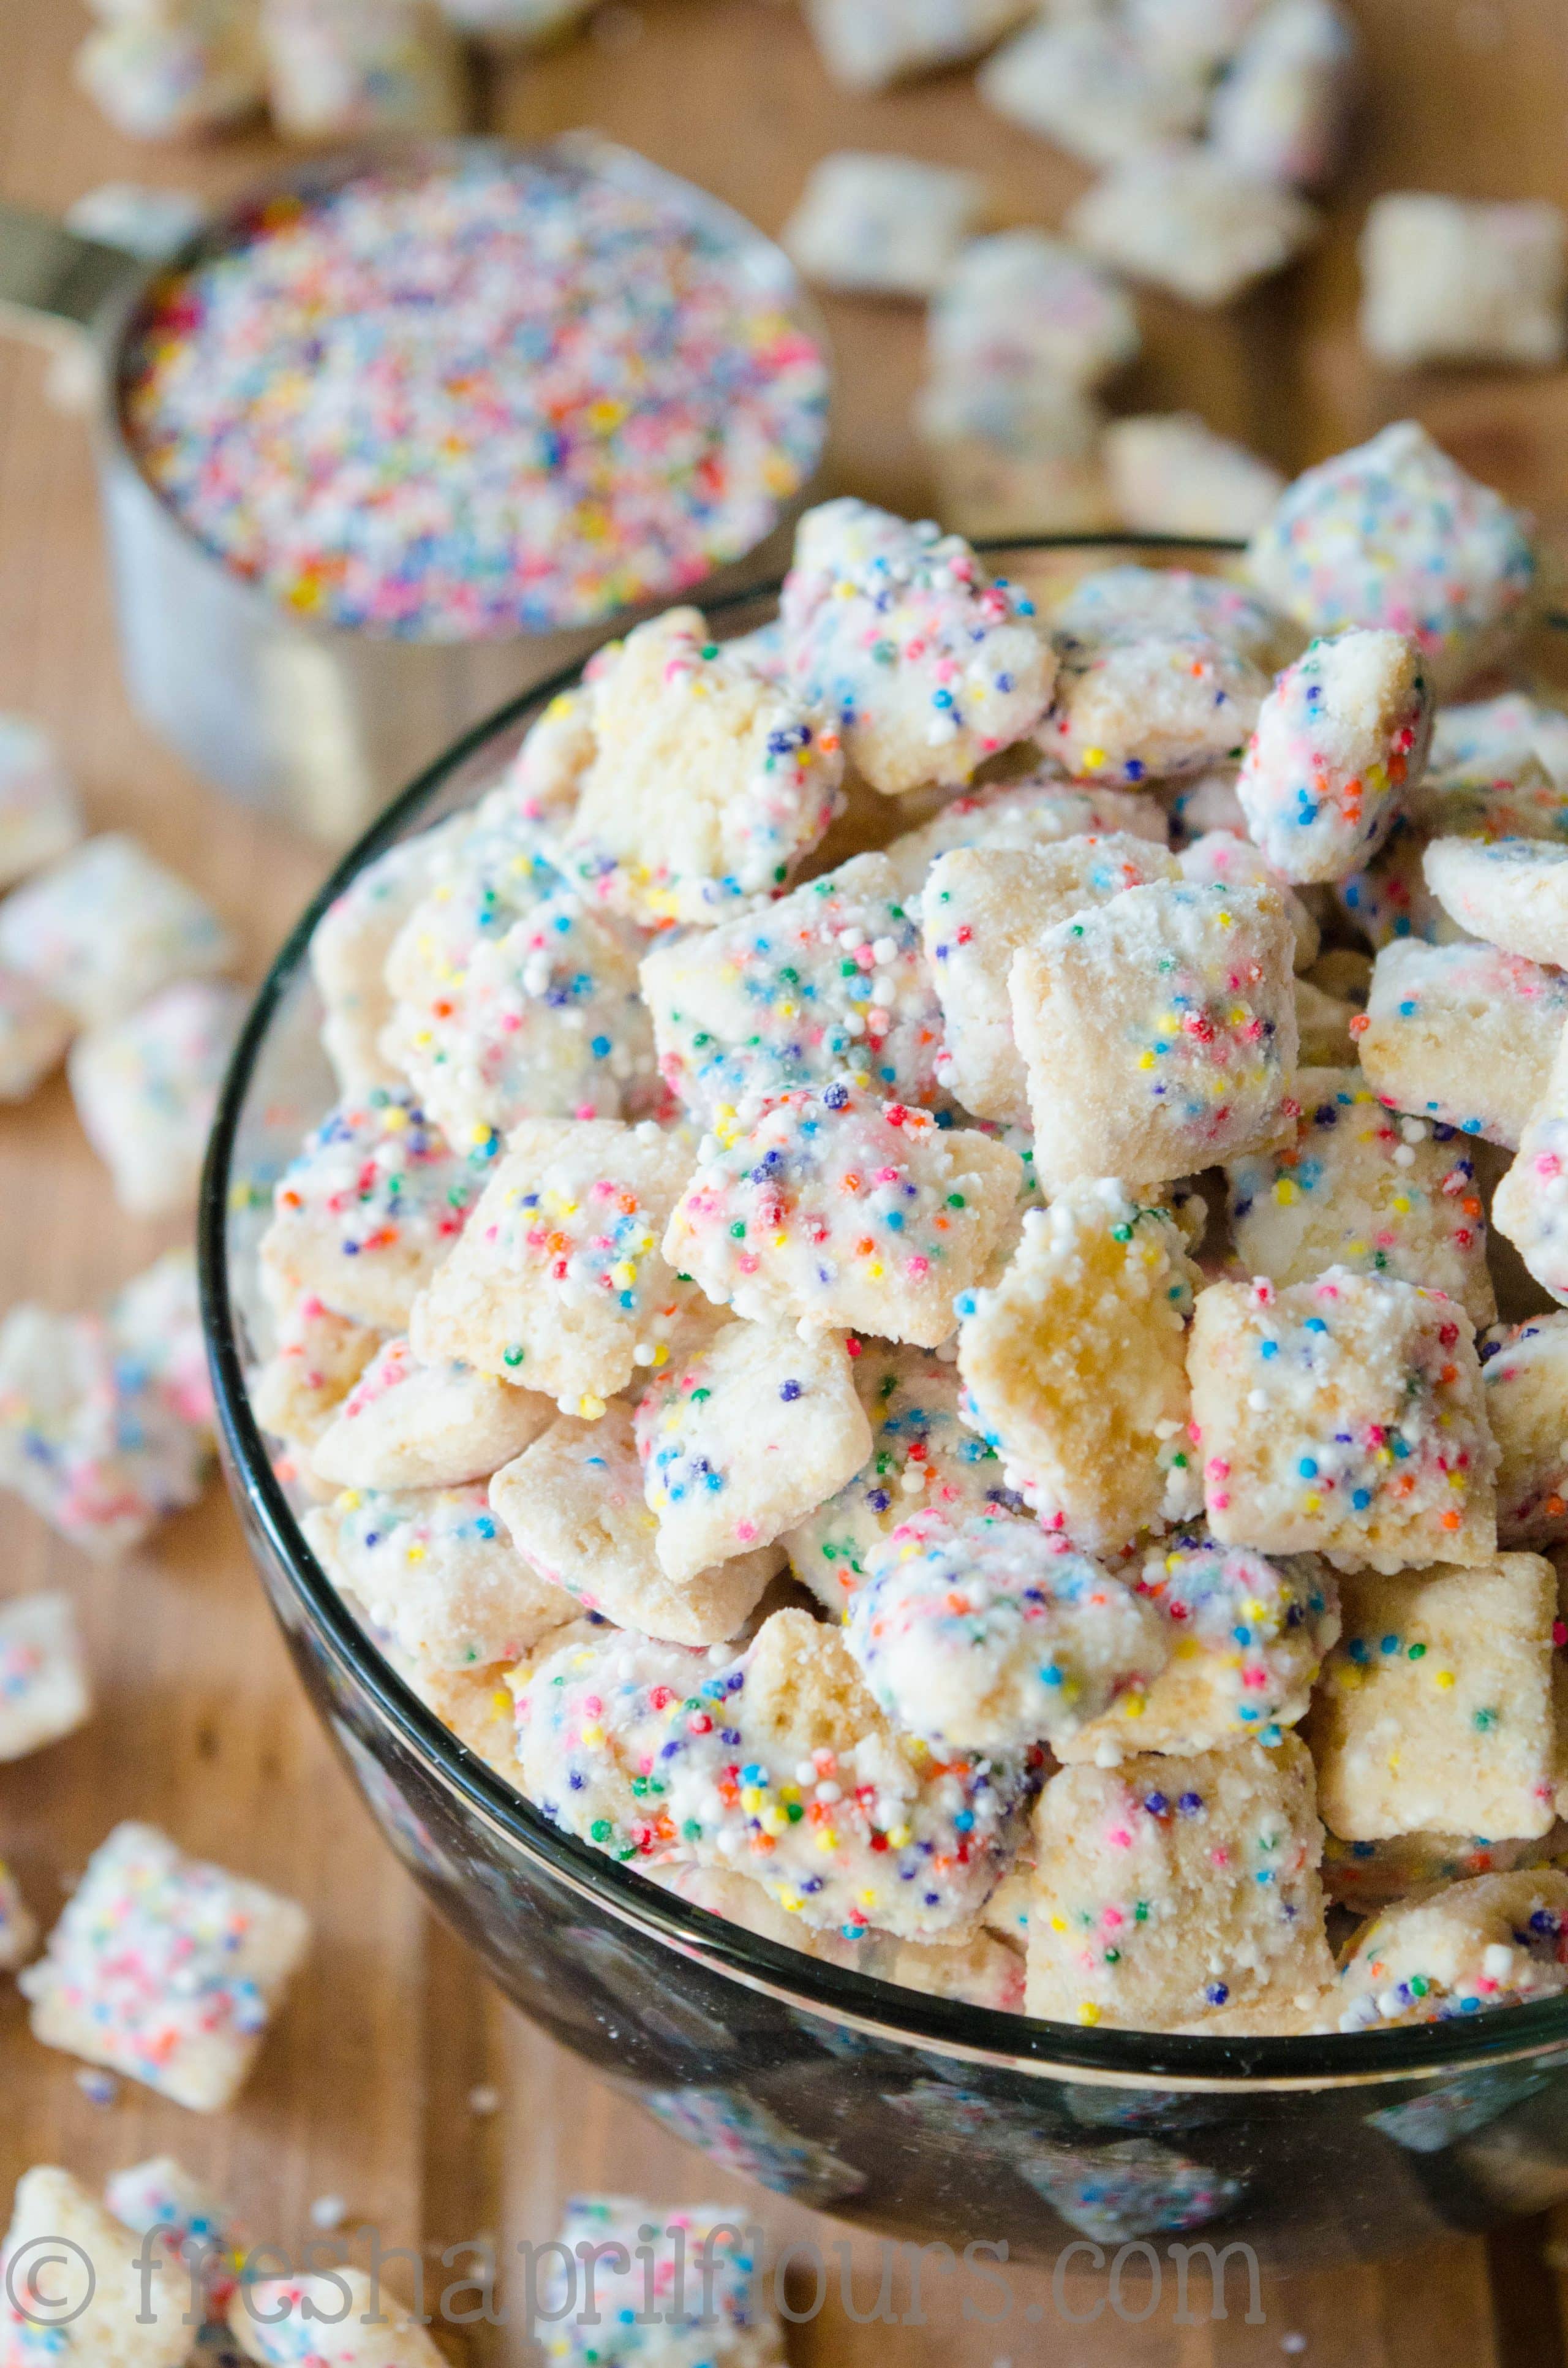 bowl of cake batter puppy chow